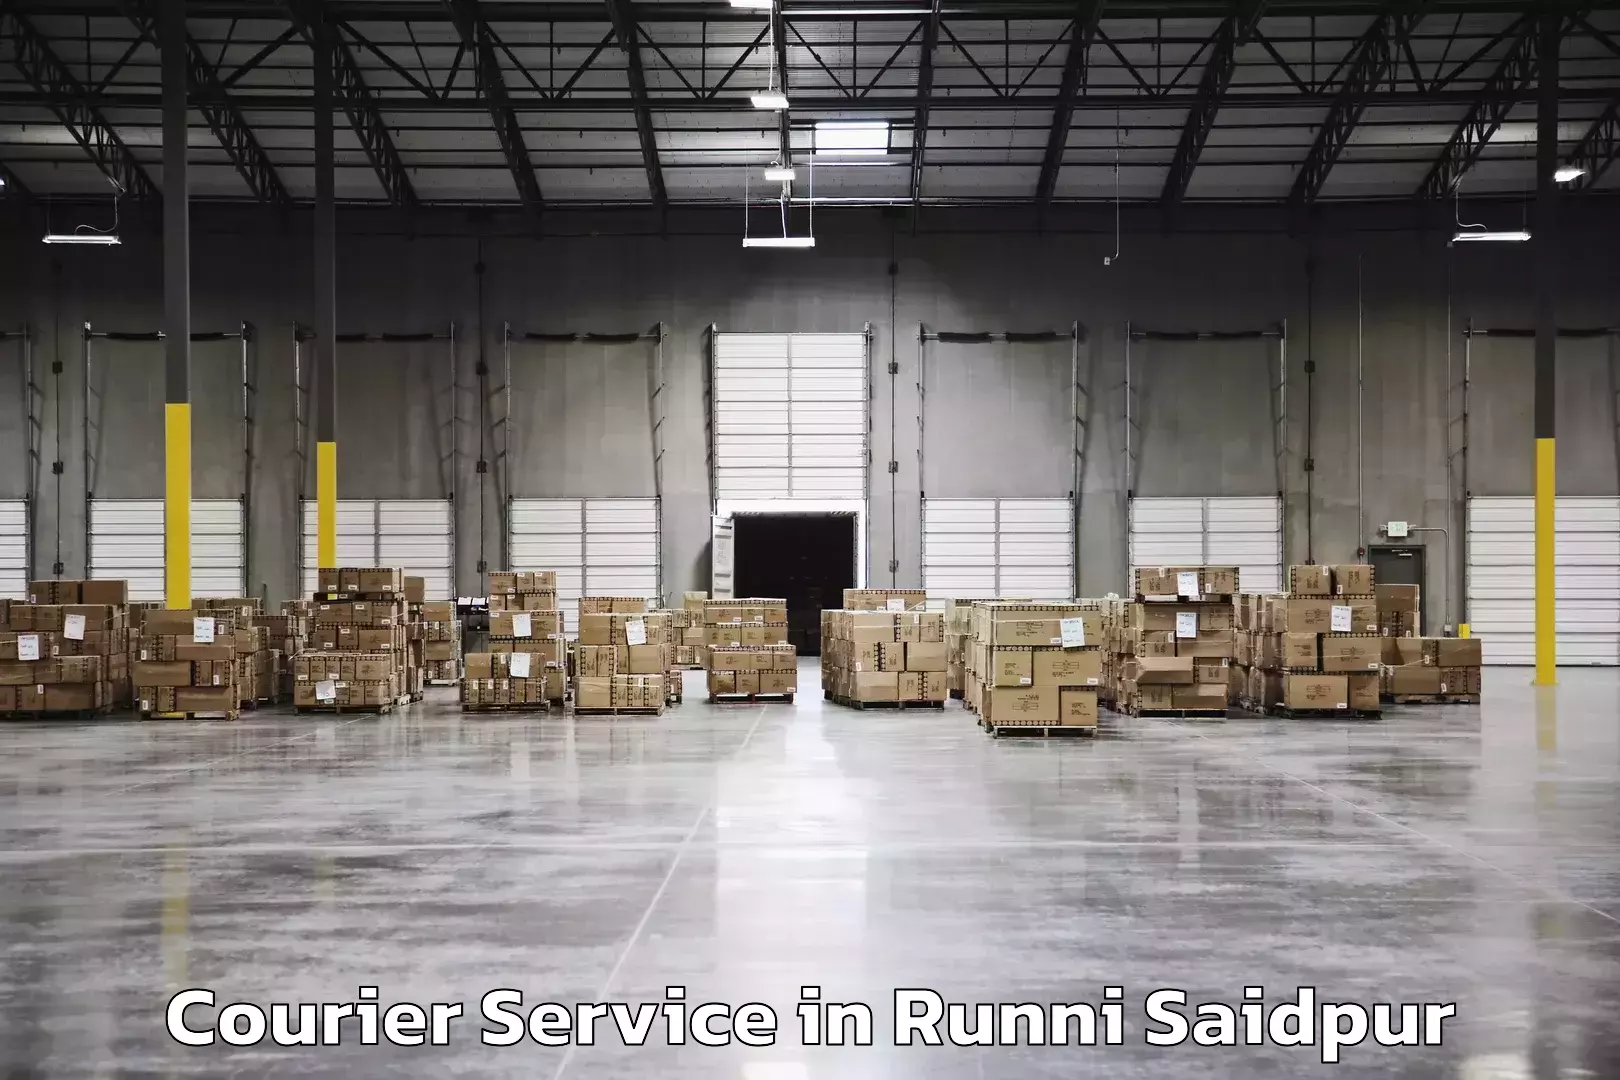 Customized delivery options in Runni Saidpur